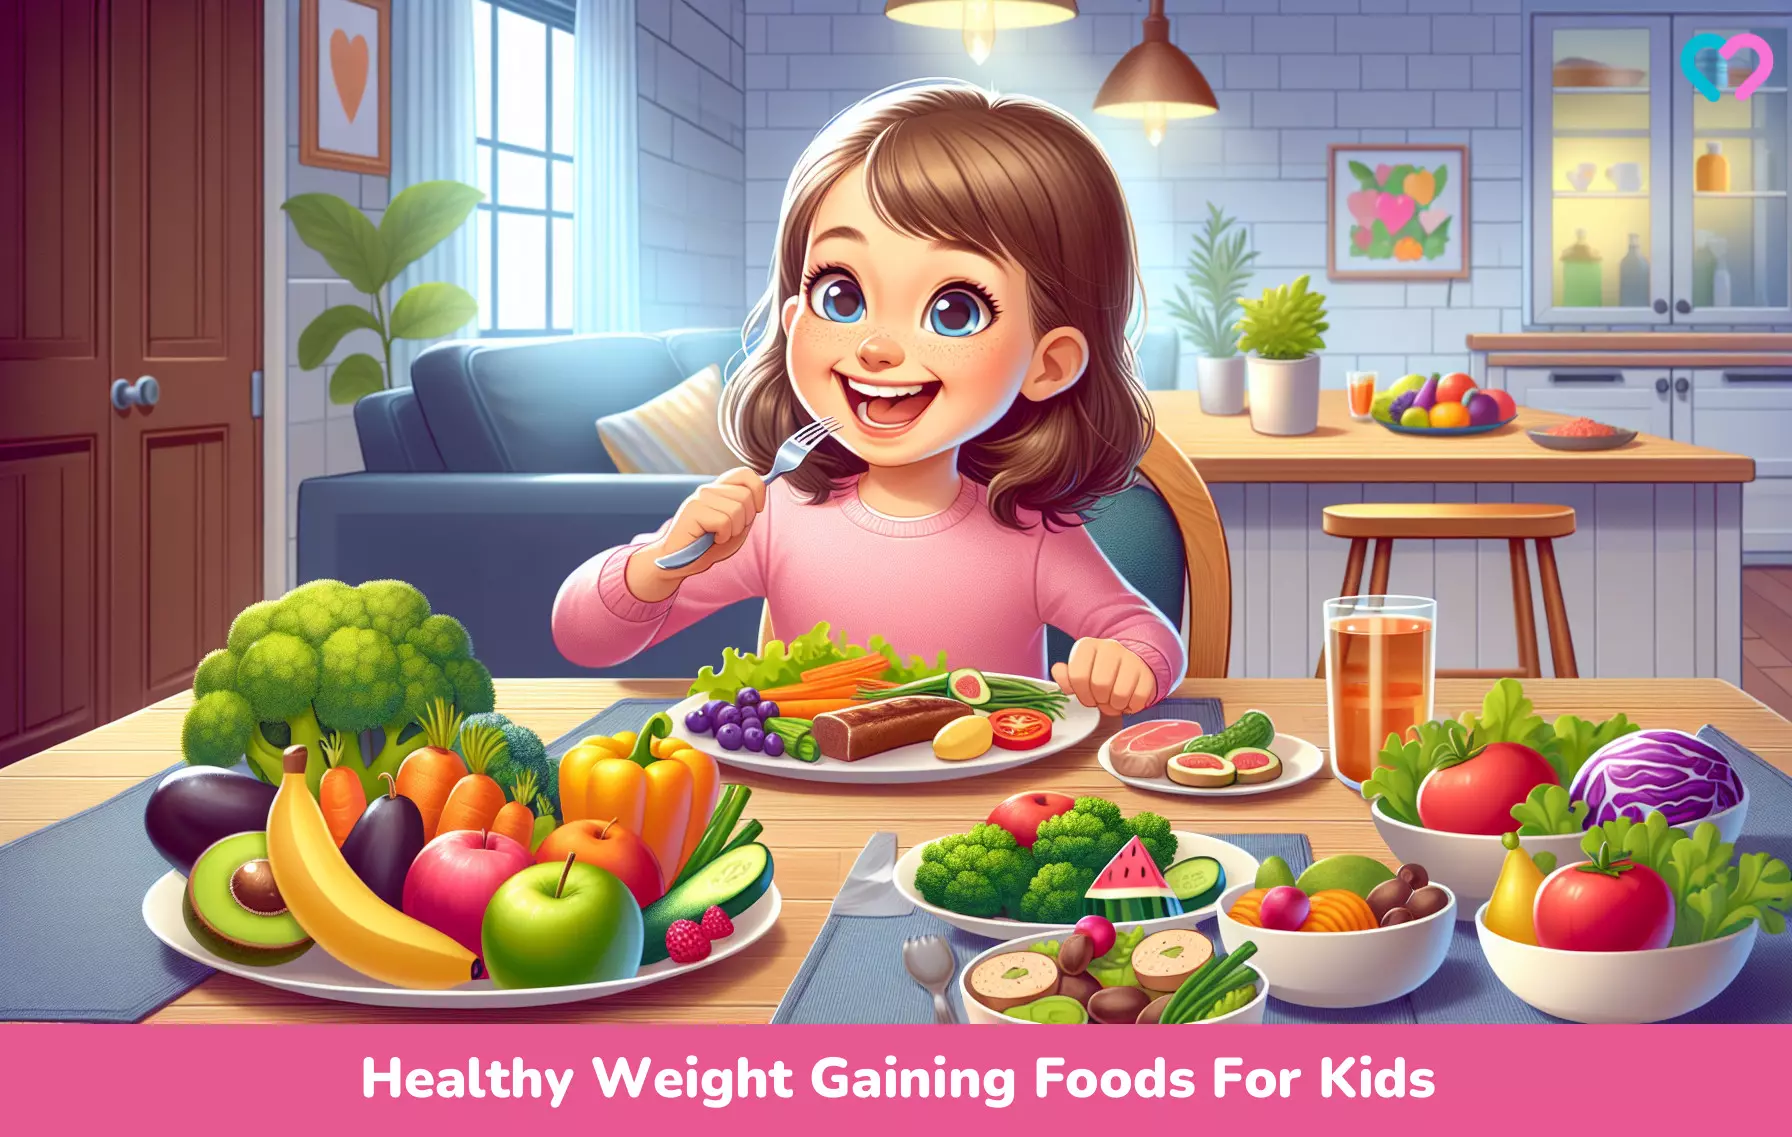 weight gain foods for kids_illustration